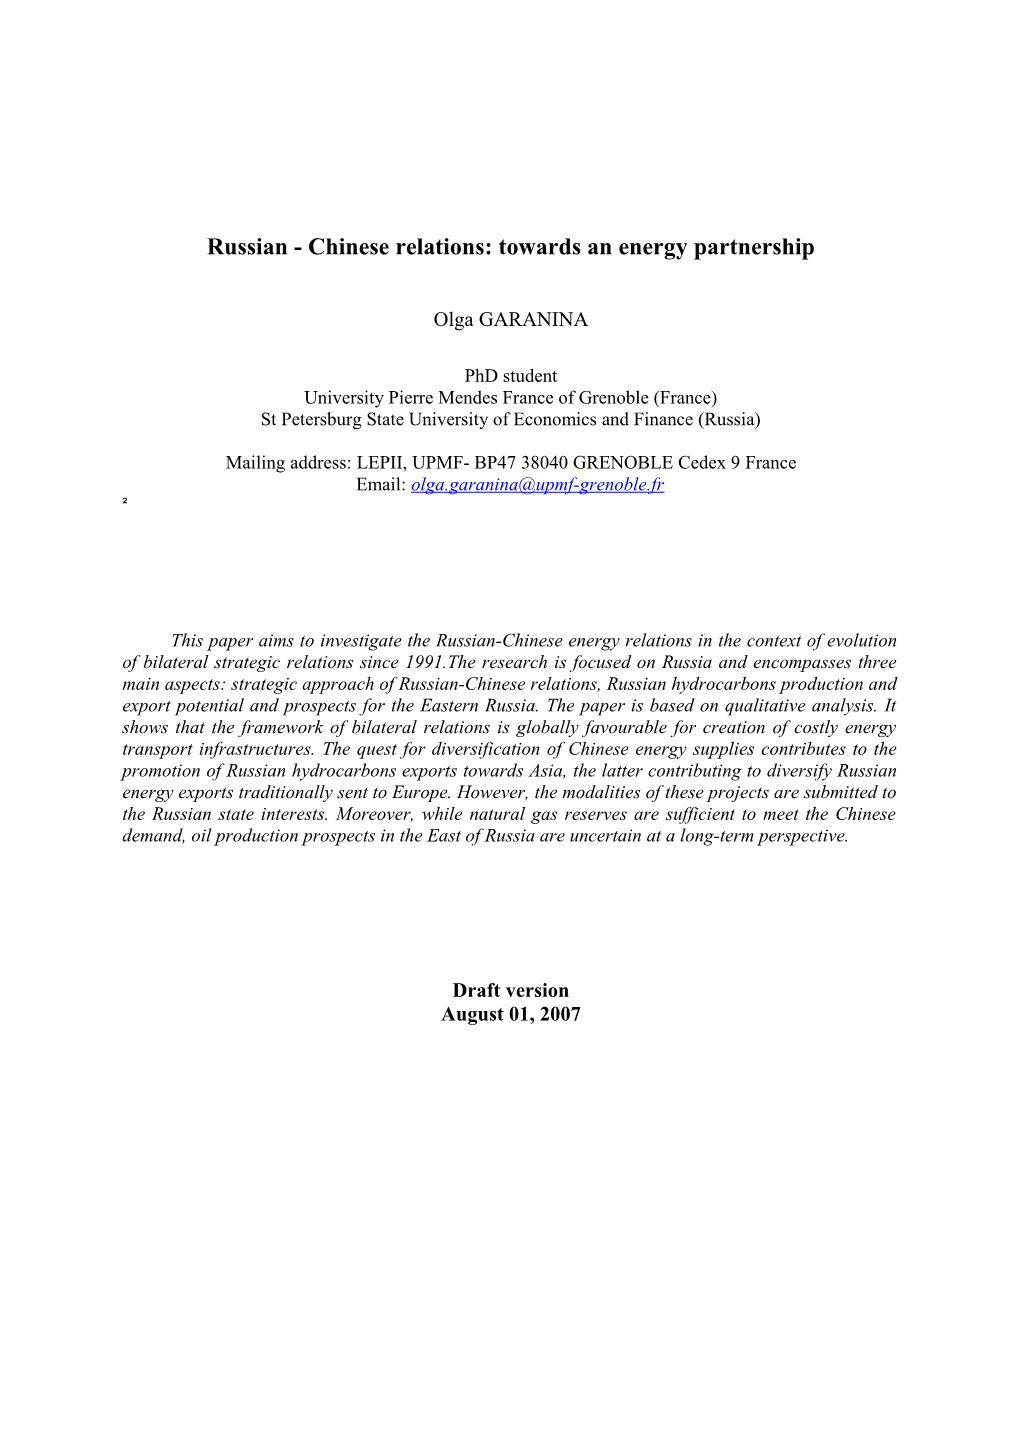 Russian - Chinese Relations: Towards an Energy Partnership